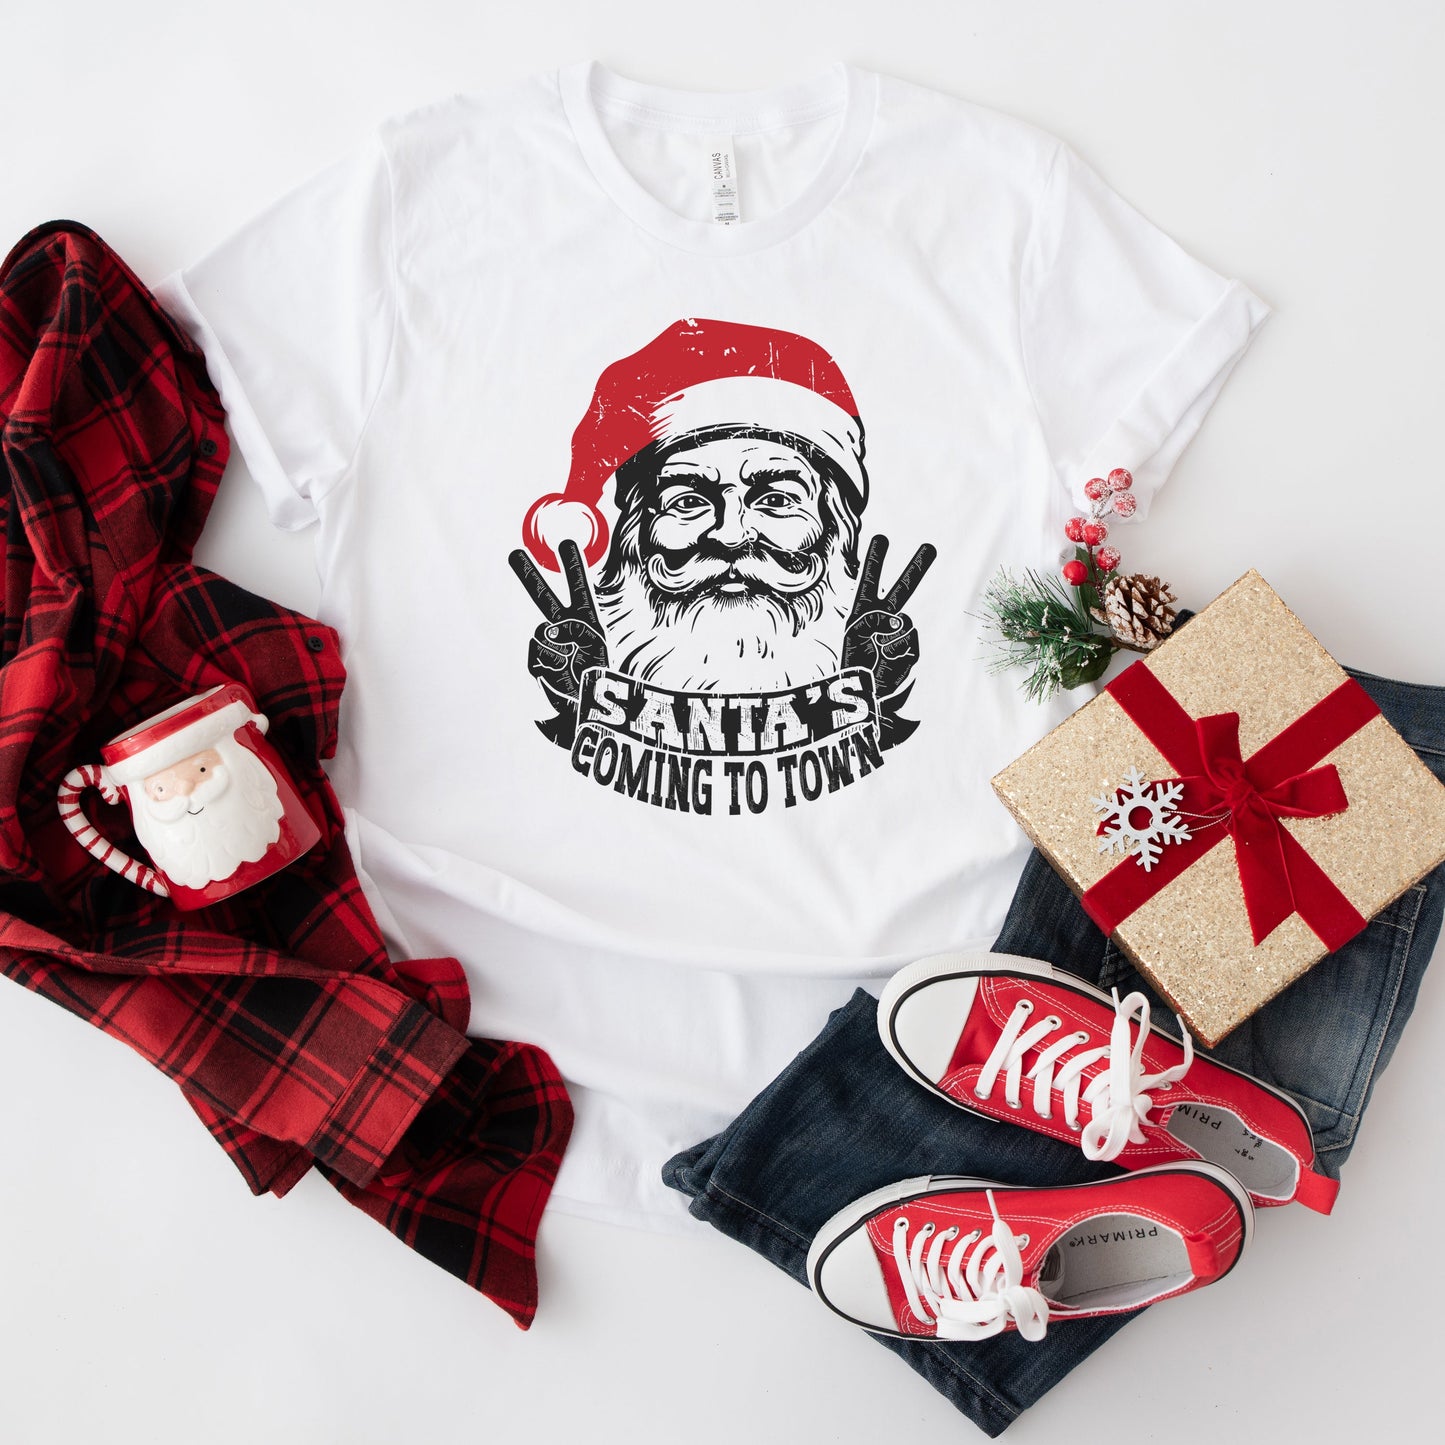 Santa's Coming to Town Peace | Short Sleeve Crew Neck